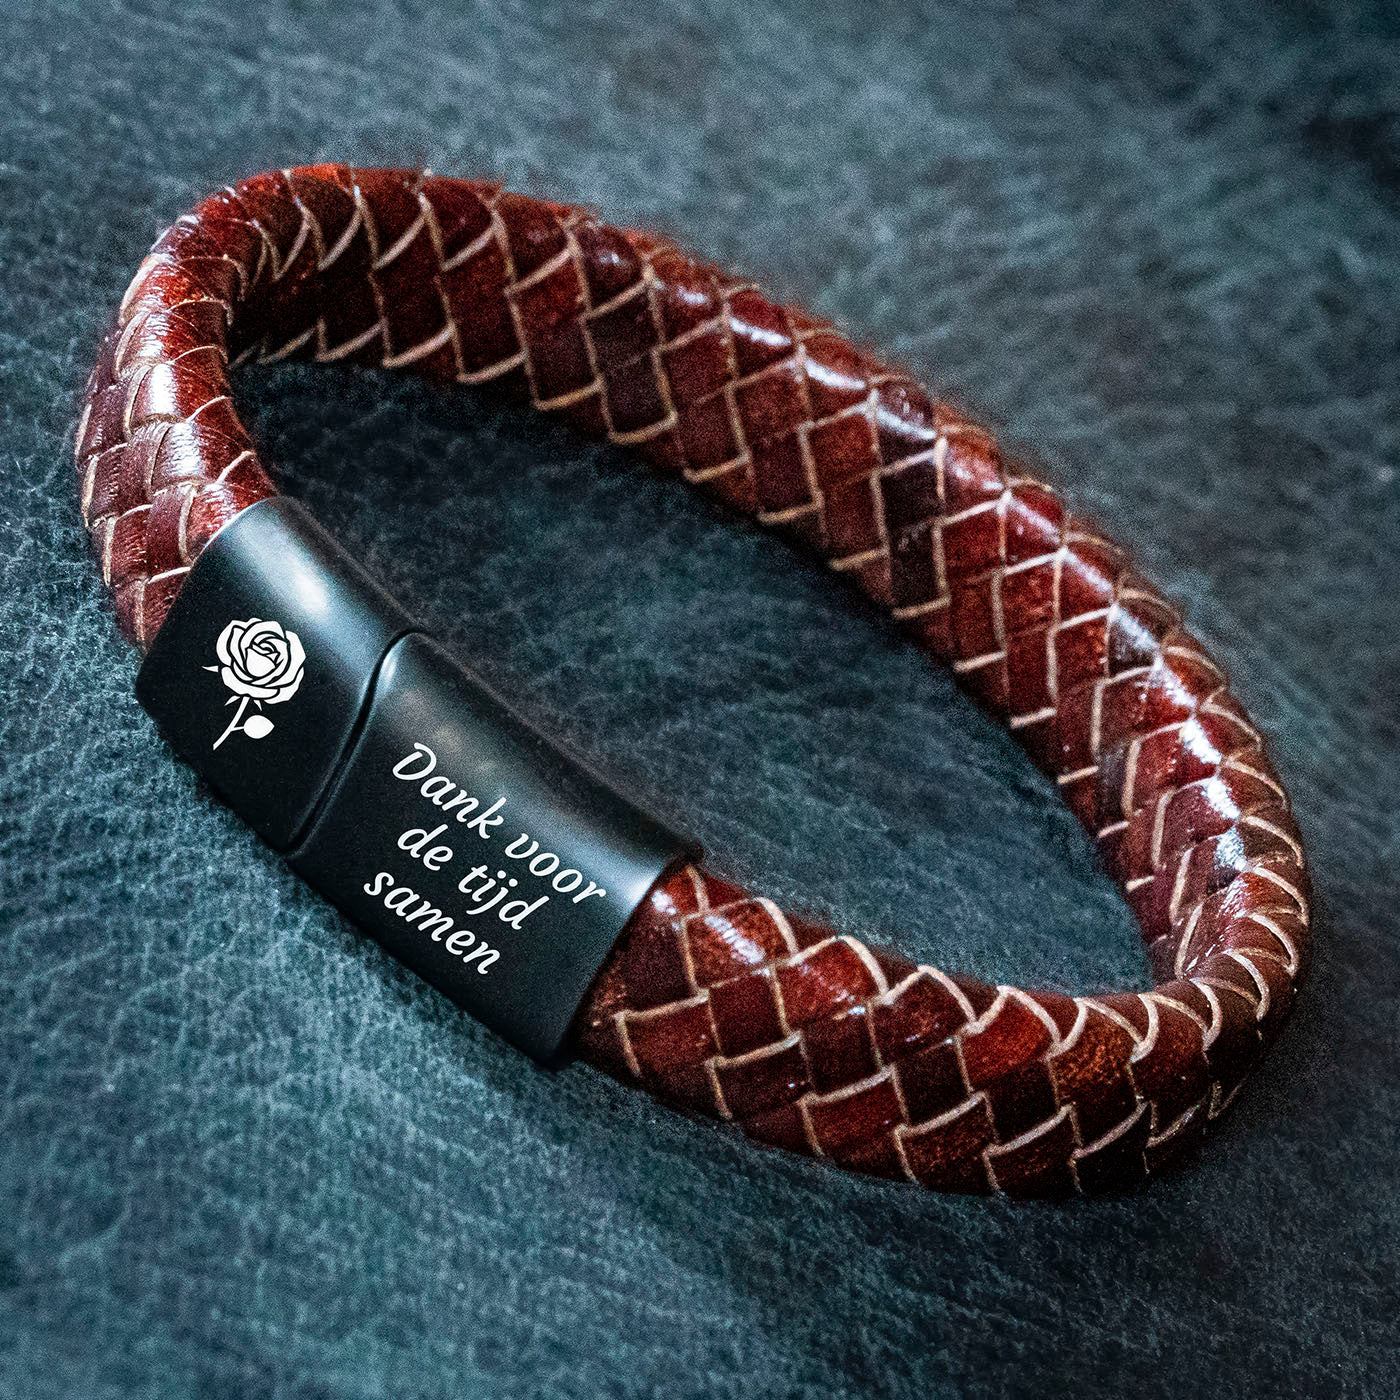 Cherry Rose (rose) bracelet - Braided leather with own engraving